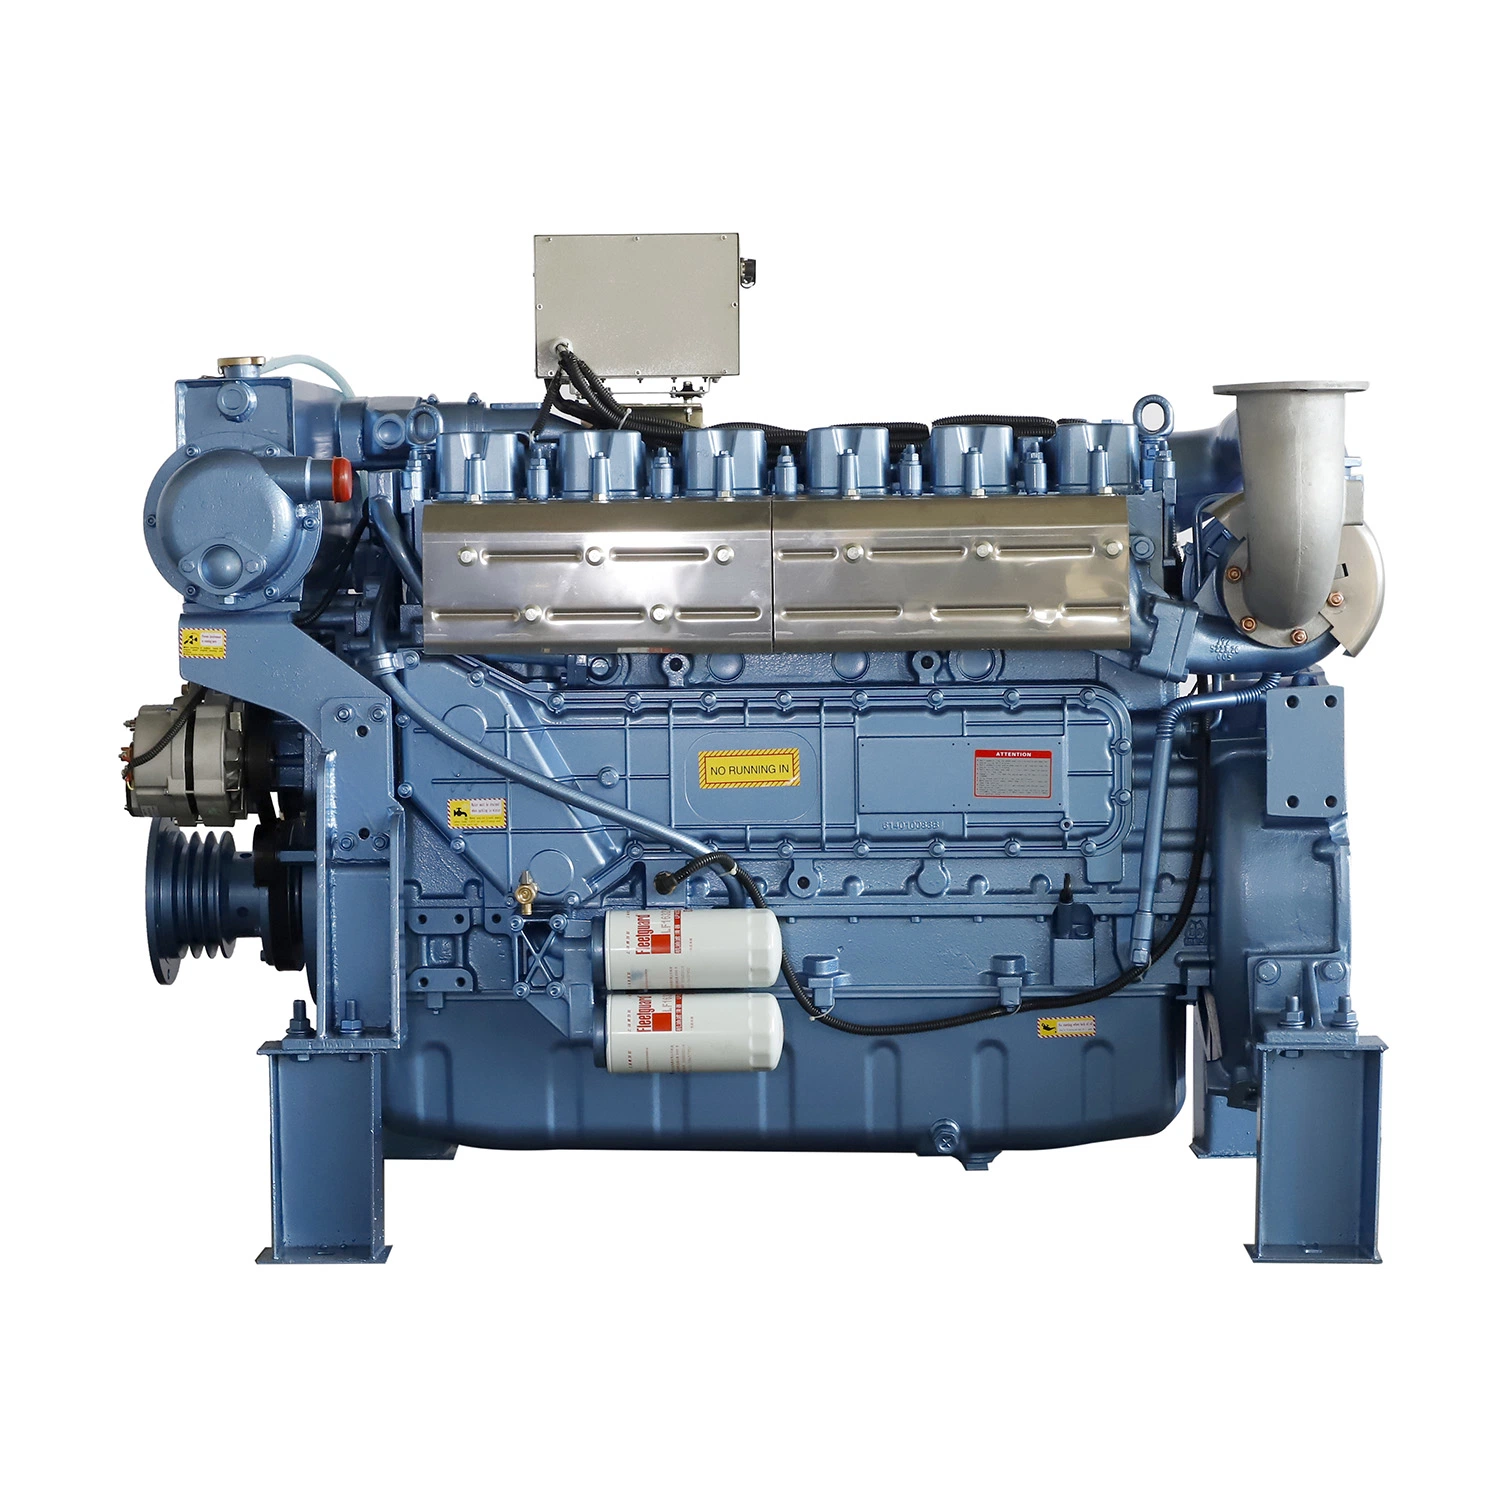 New Condition Water Cooled 4 Stroke Multi-Cylinder Diesel Engines with Electric Start for Ship